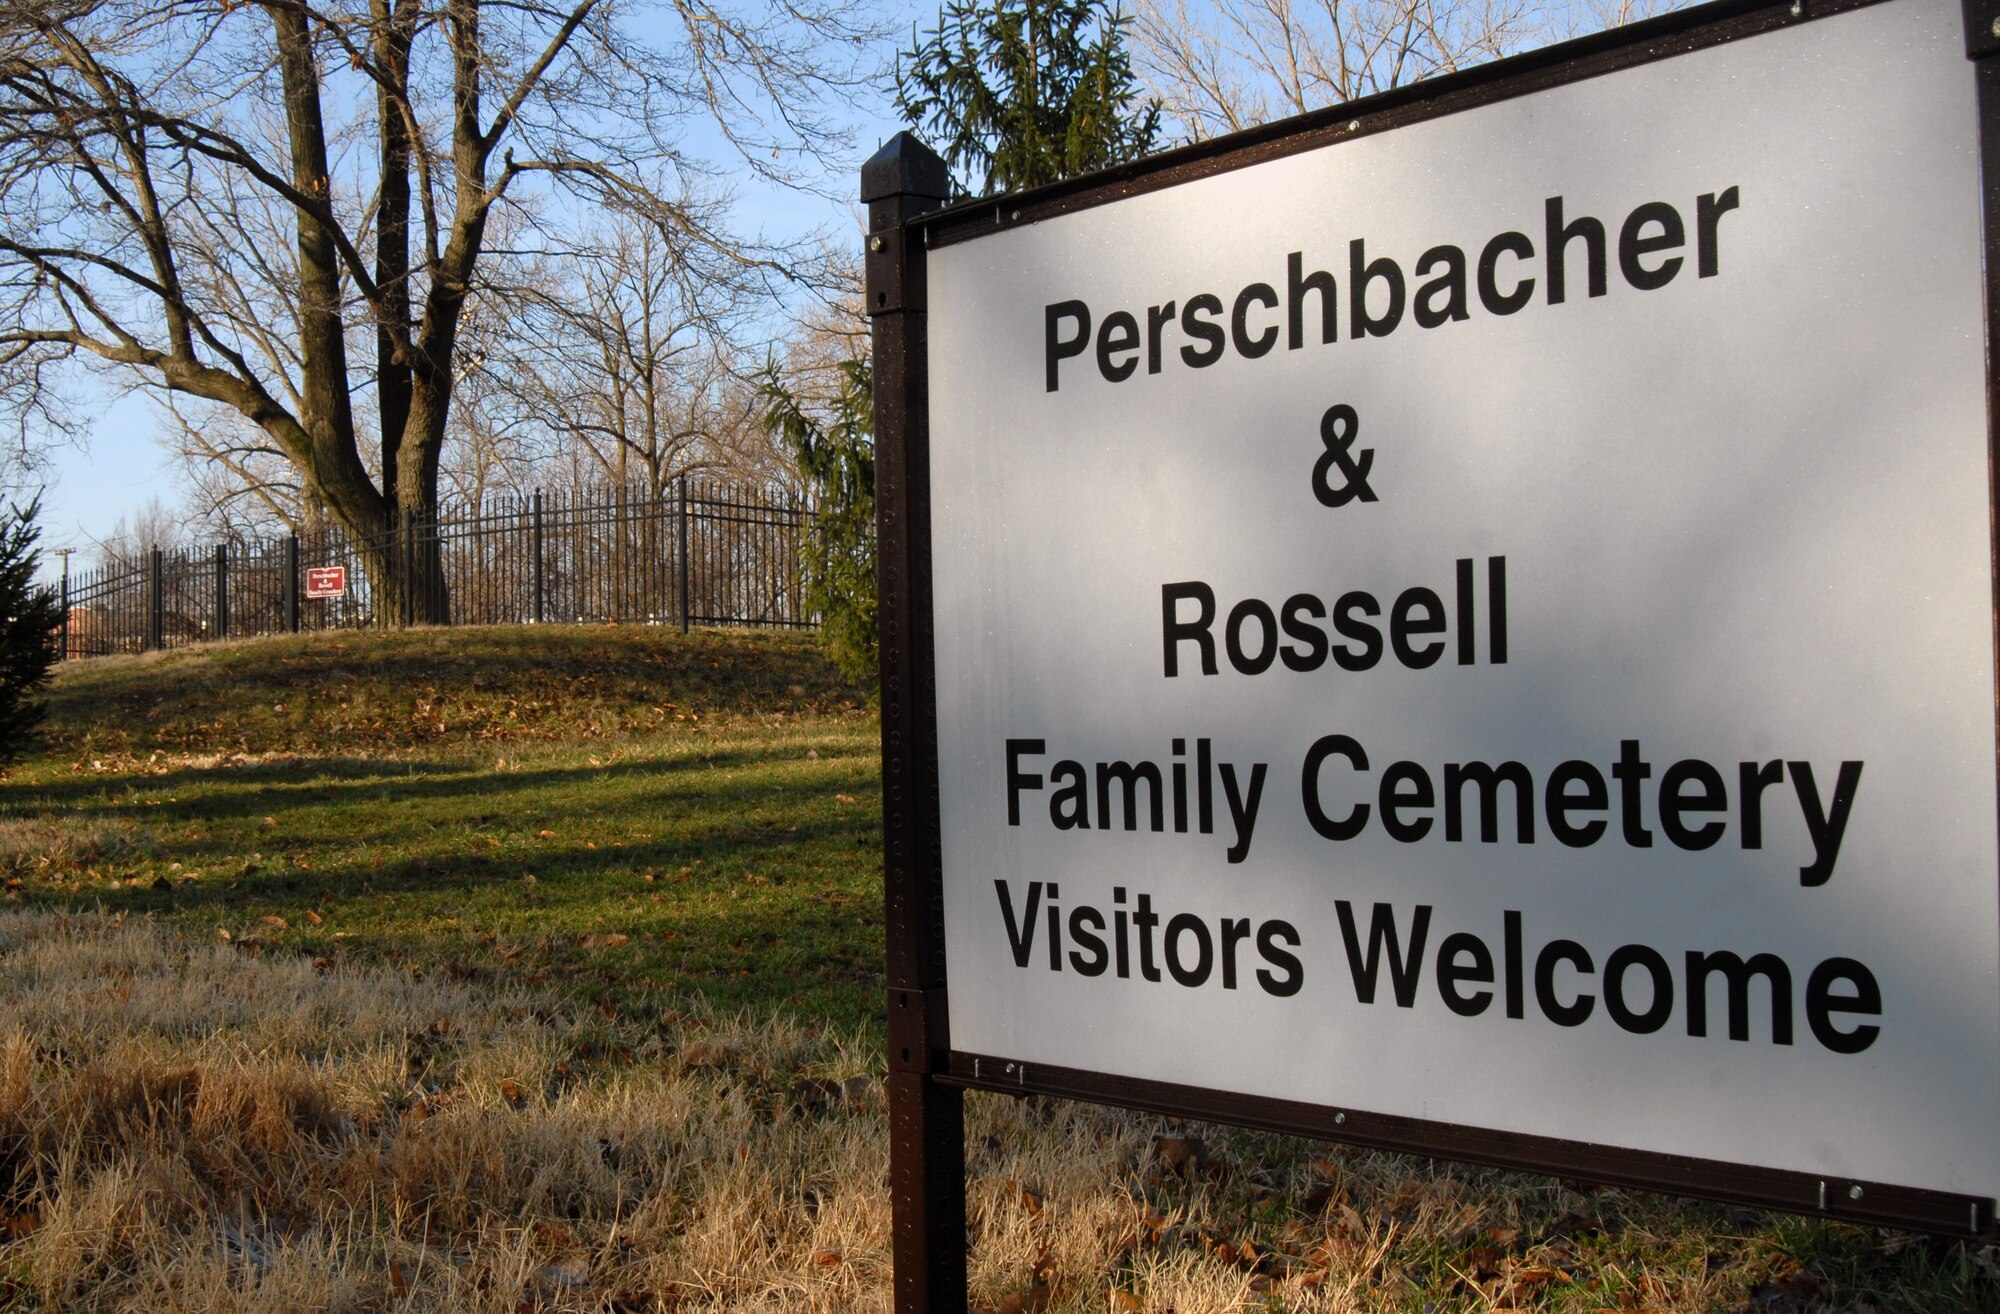 SCOTT AIR FORCE BASE, Ill. -- A welcome sign invites visitors to the Perschbacher and Rossell family cemetery located near Scott Lake. The sign is one of the many improvement and restoration projects to the cemetery which is one of two mid-nineteenth century pioneer families located on Scott. (U.S. Air Force Photo by Senior Airman Andrew Davis)